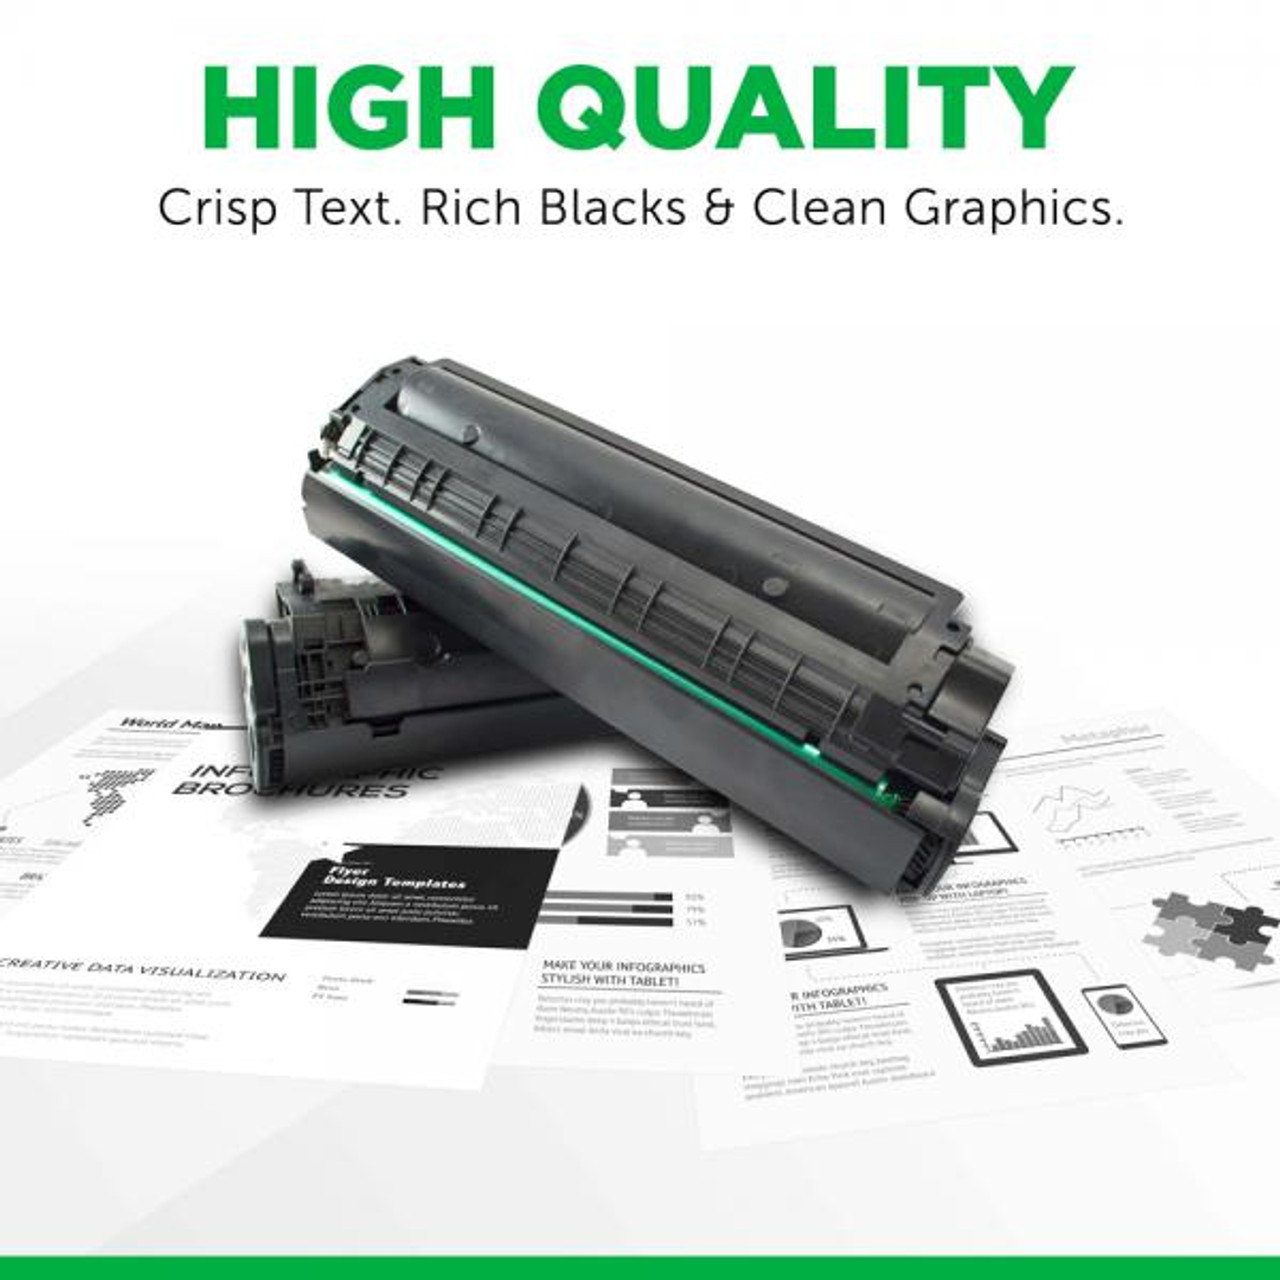 High Yield Toner Cartridge for Dell M5200/W5300-4